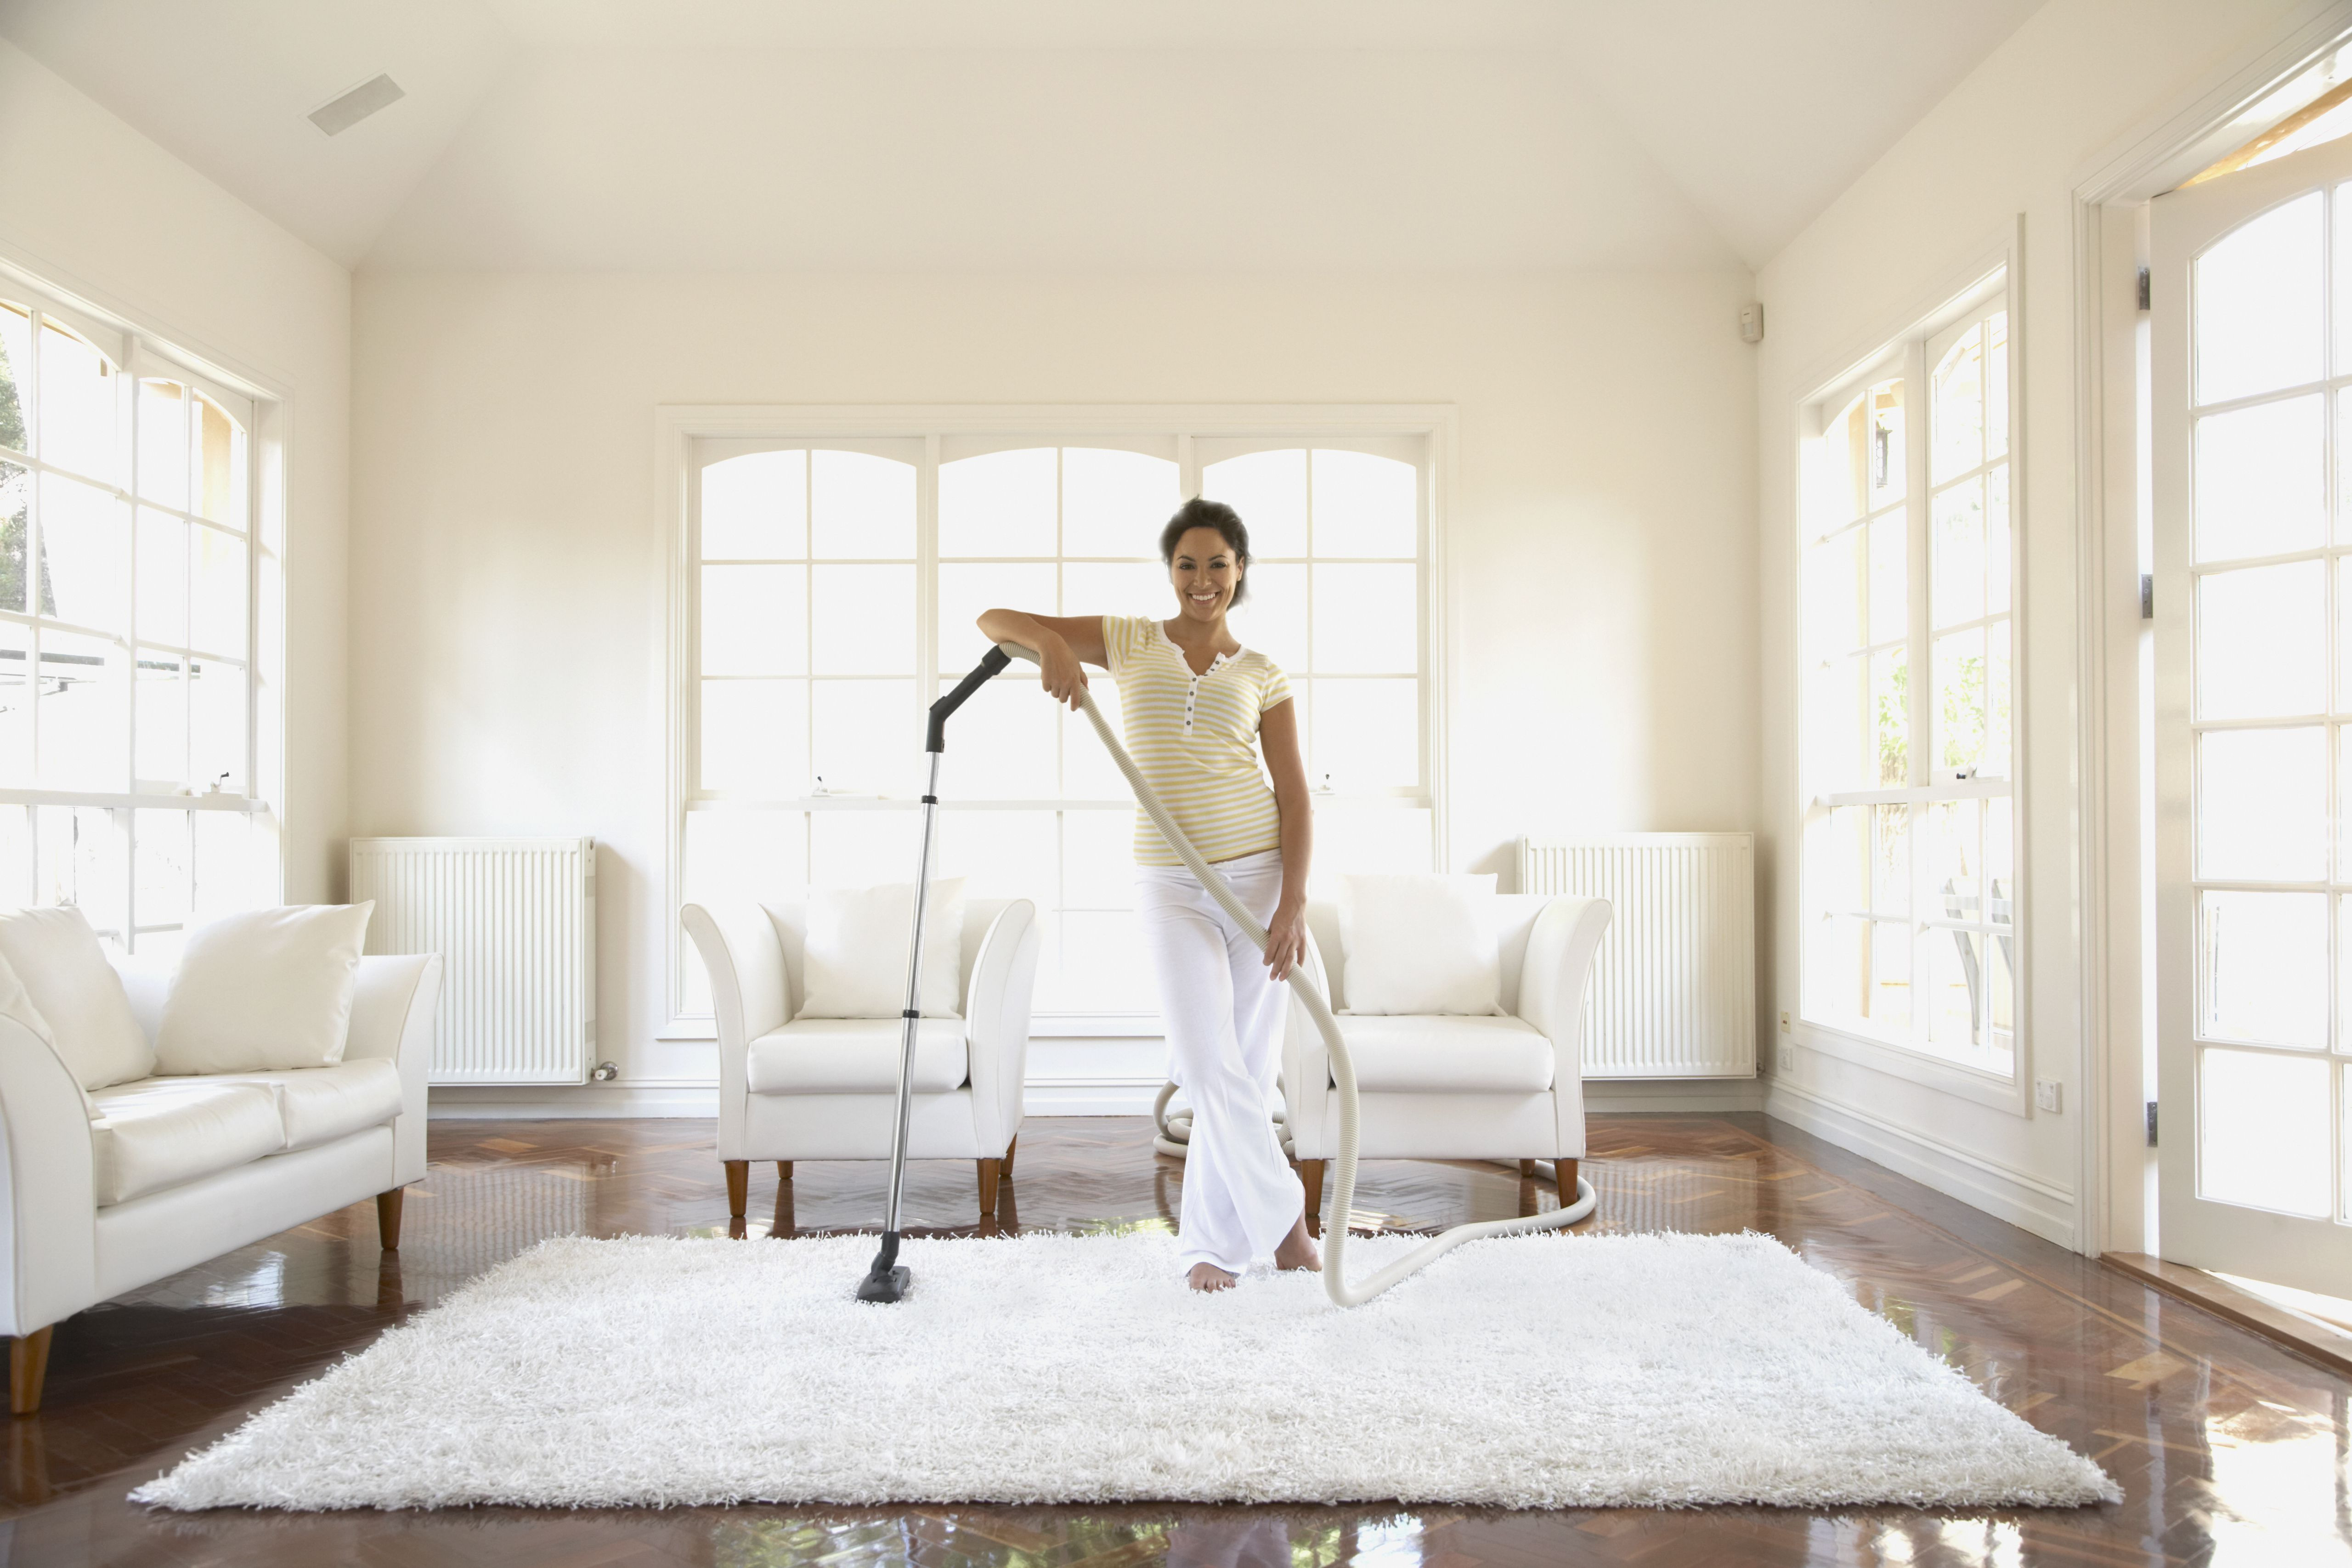 top 10 vacuums for hardwood floors of the 10 best vacuum cleaners to buy in 2018 intended for hispanic woman vacuuming floor 90306711 59e0f83a03f4020010529fe6